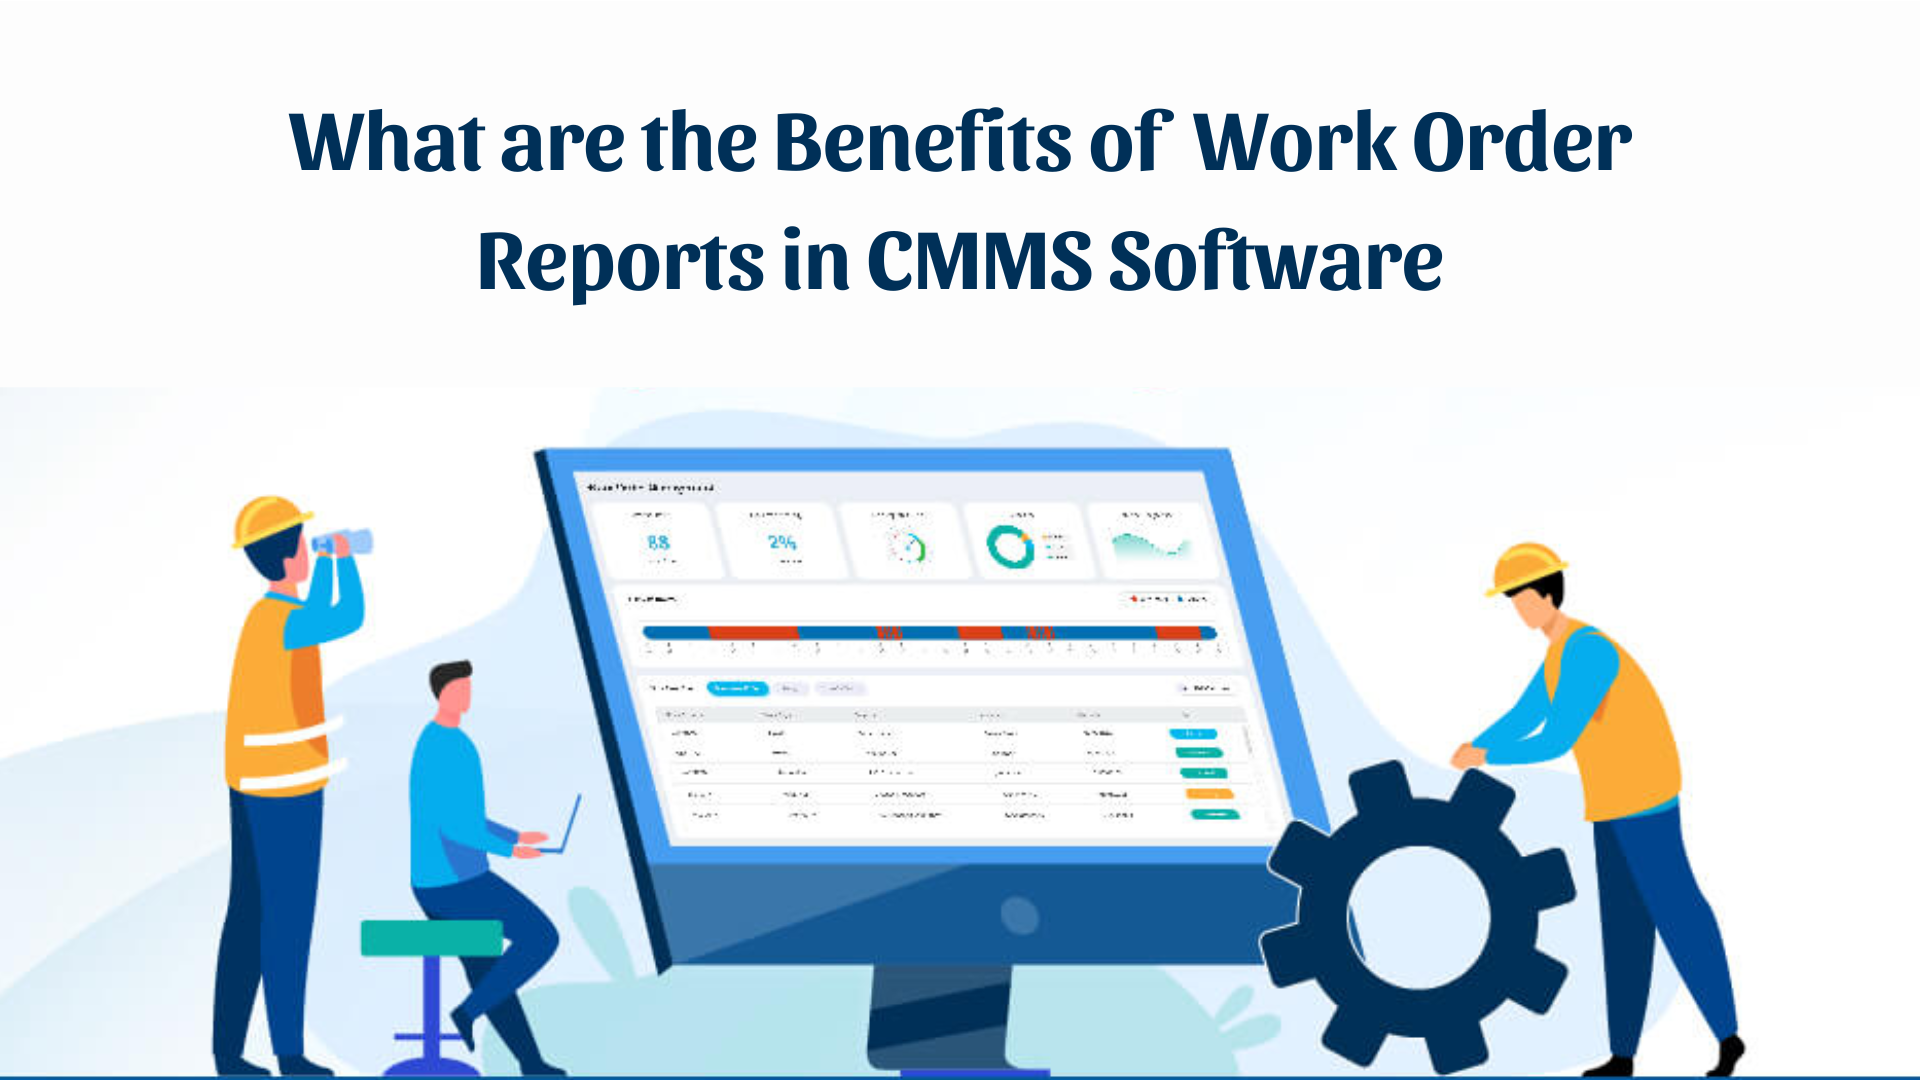 What are the Benefits of Work Order Reports in CMMS